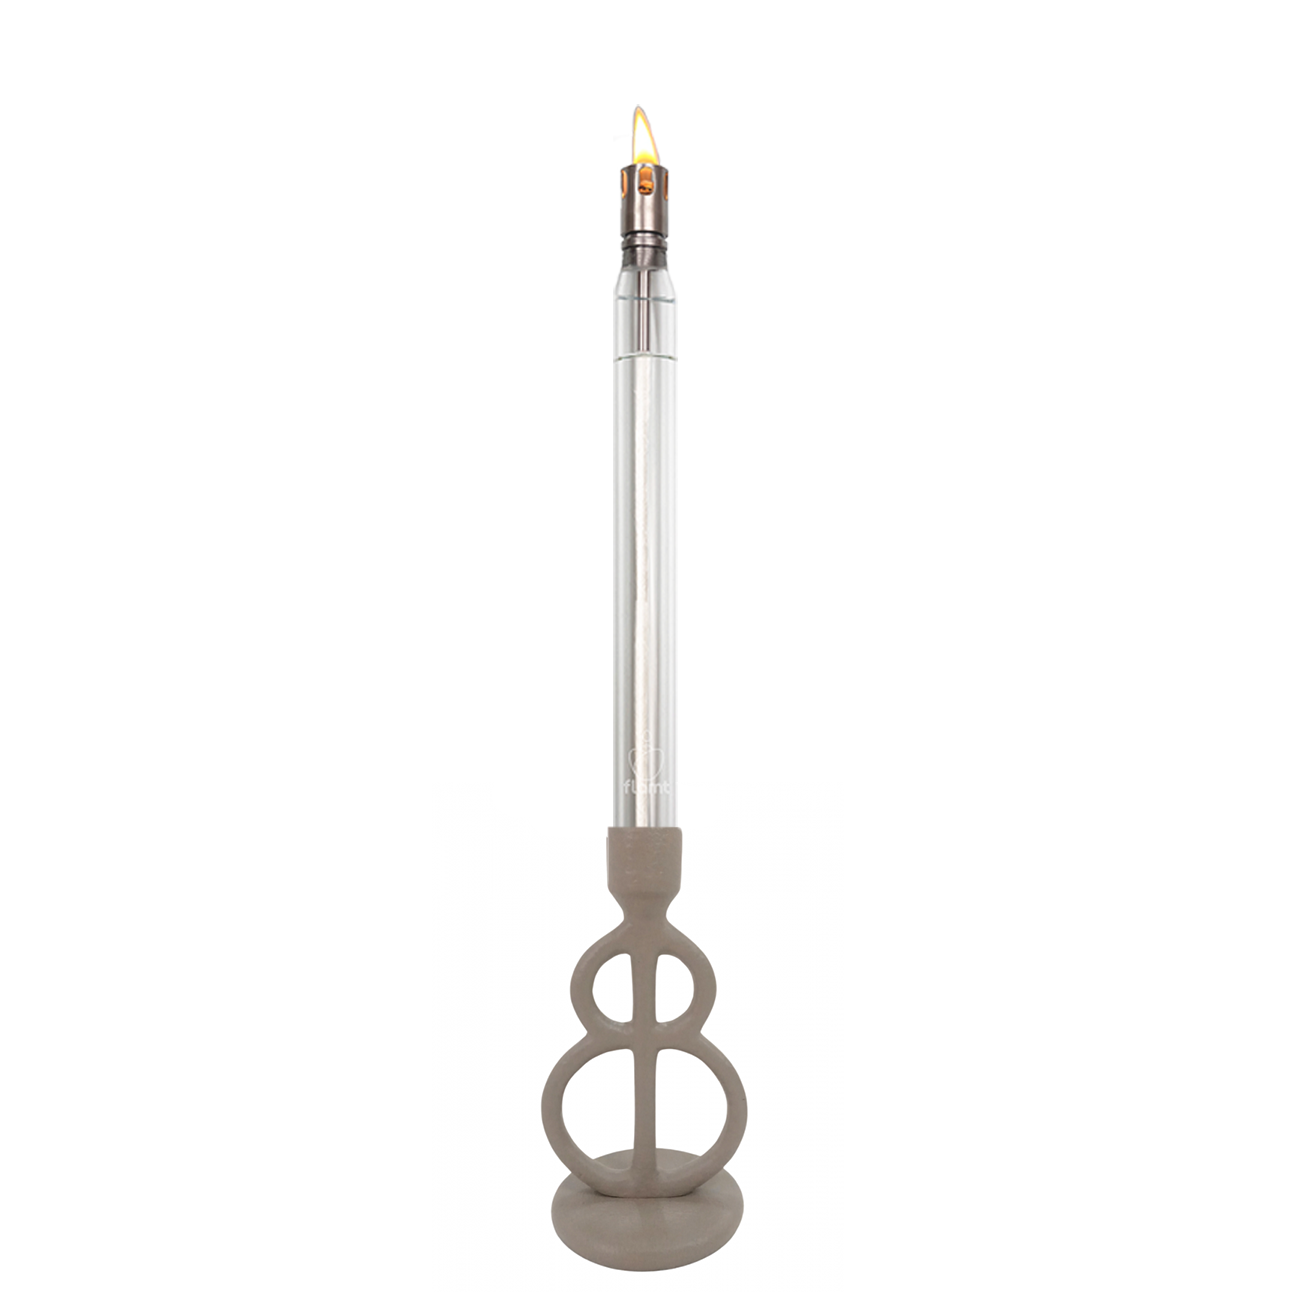 Combi Deal: Flamt Candle 3.1 + Gaia Taupe Candlestick